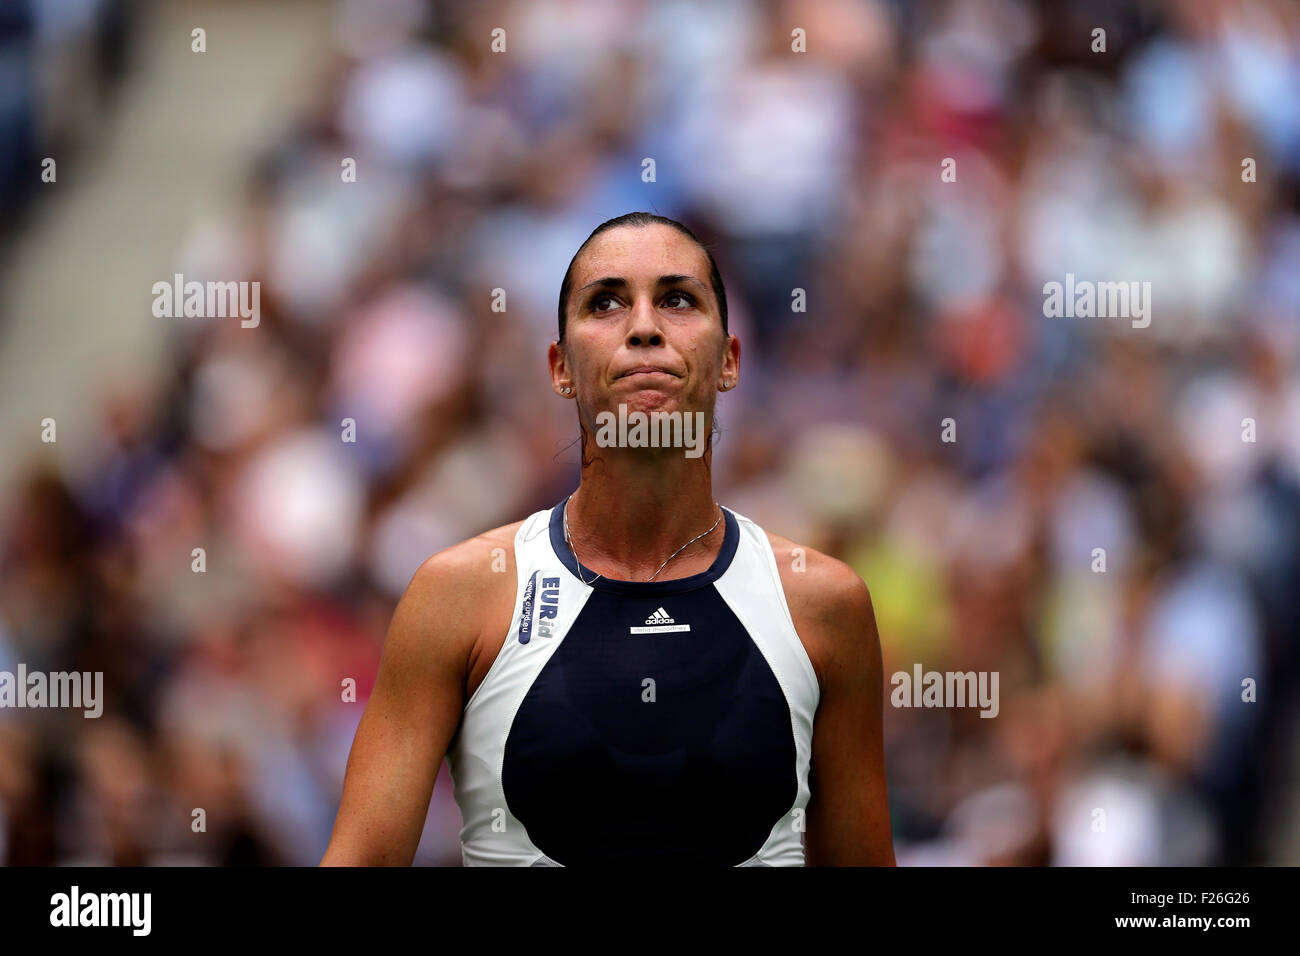 New York, USA. 12th Sep, 2015. Flavia Penetta of Italy during the women's final of the U.S. Open against countrywoman Roberta Vinci at Flushing Meadows, New York on the afternoon of September 12th, 2015.  Pennetta won the match 7-6 (7-4), 6-2 Credit:  Adam Stoltman/Alamy Live News Stock Photo